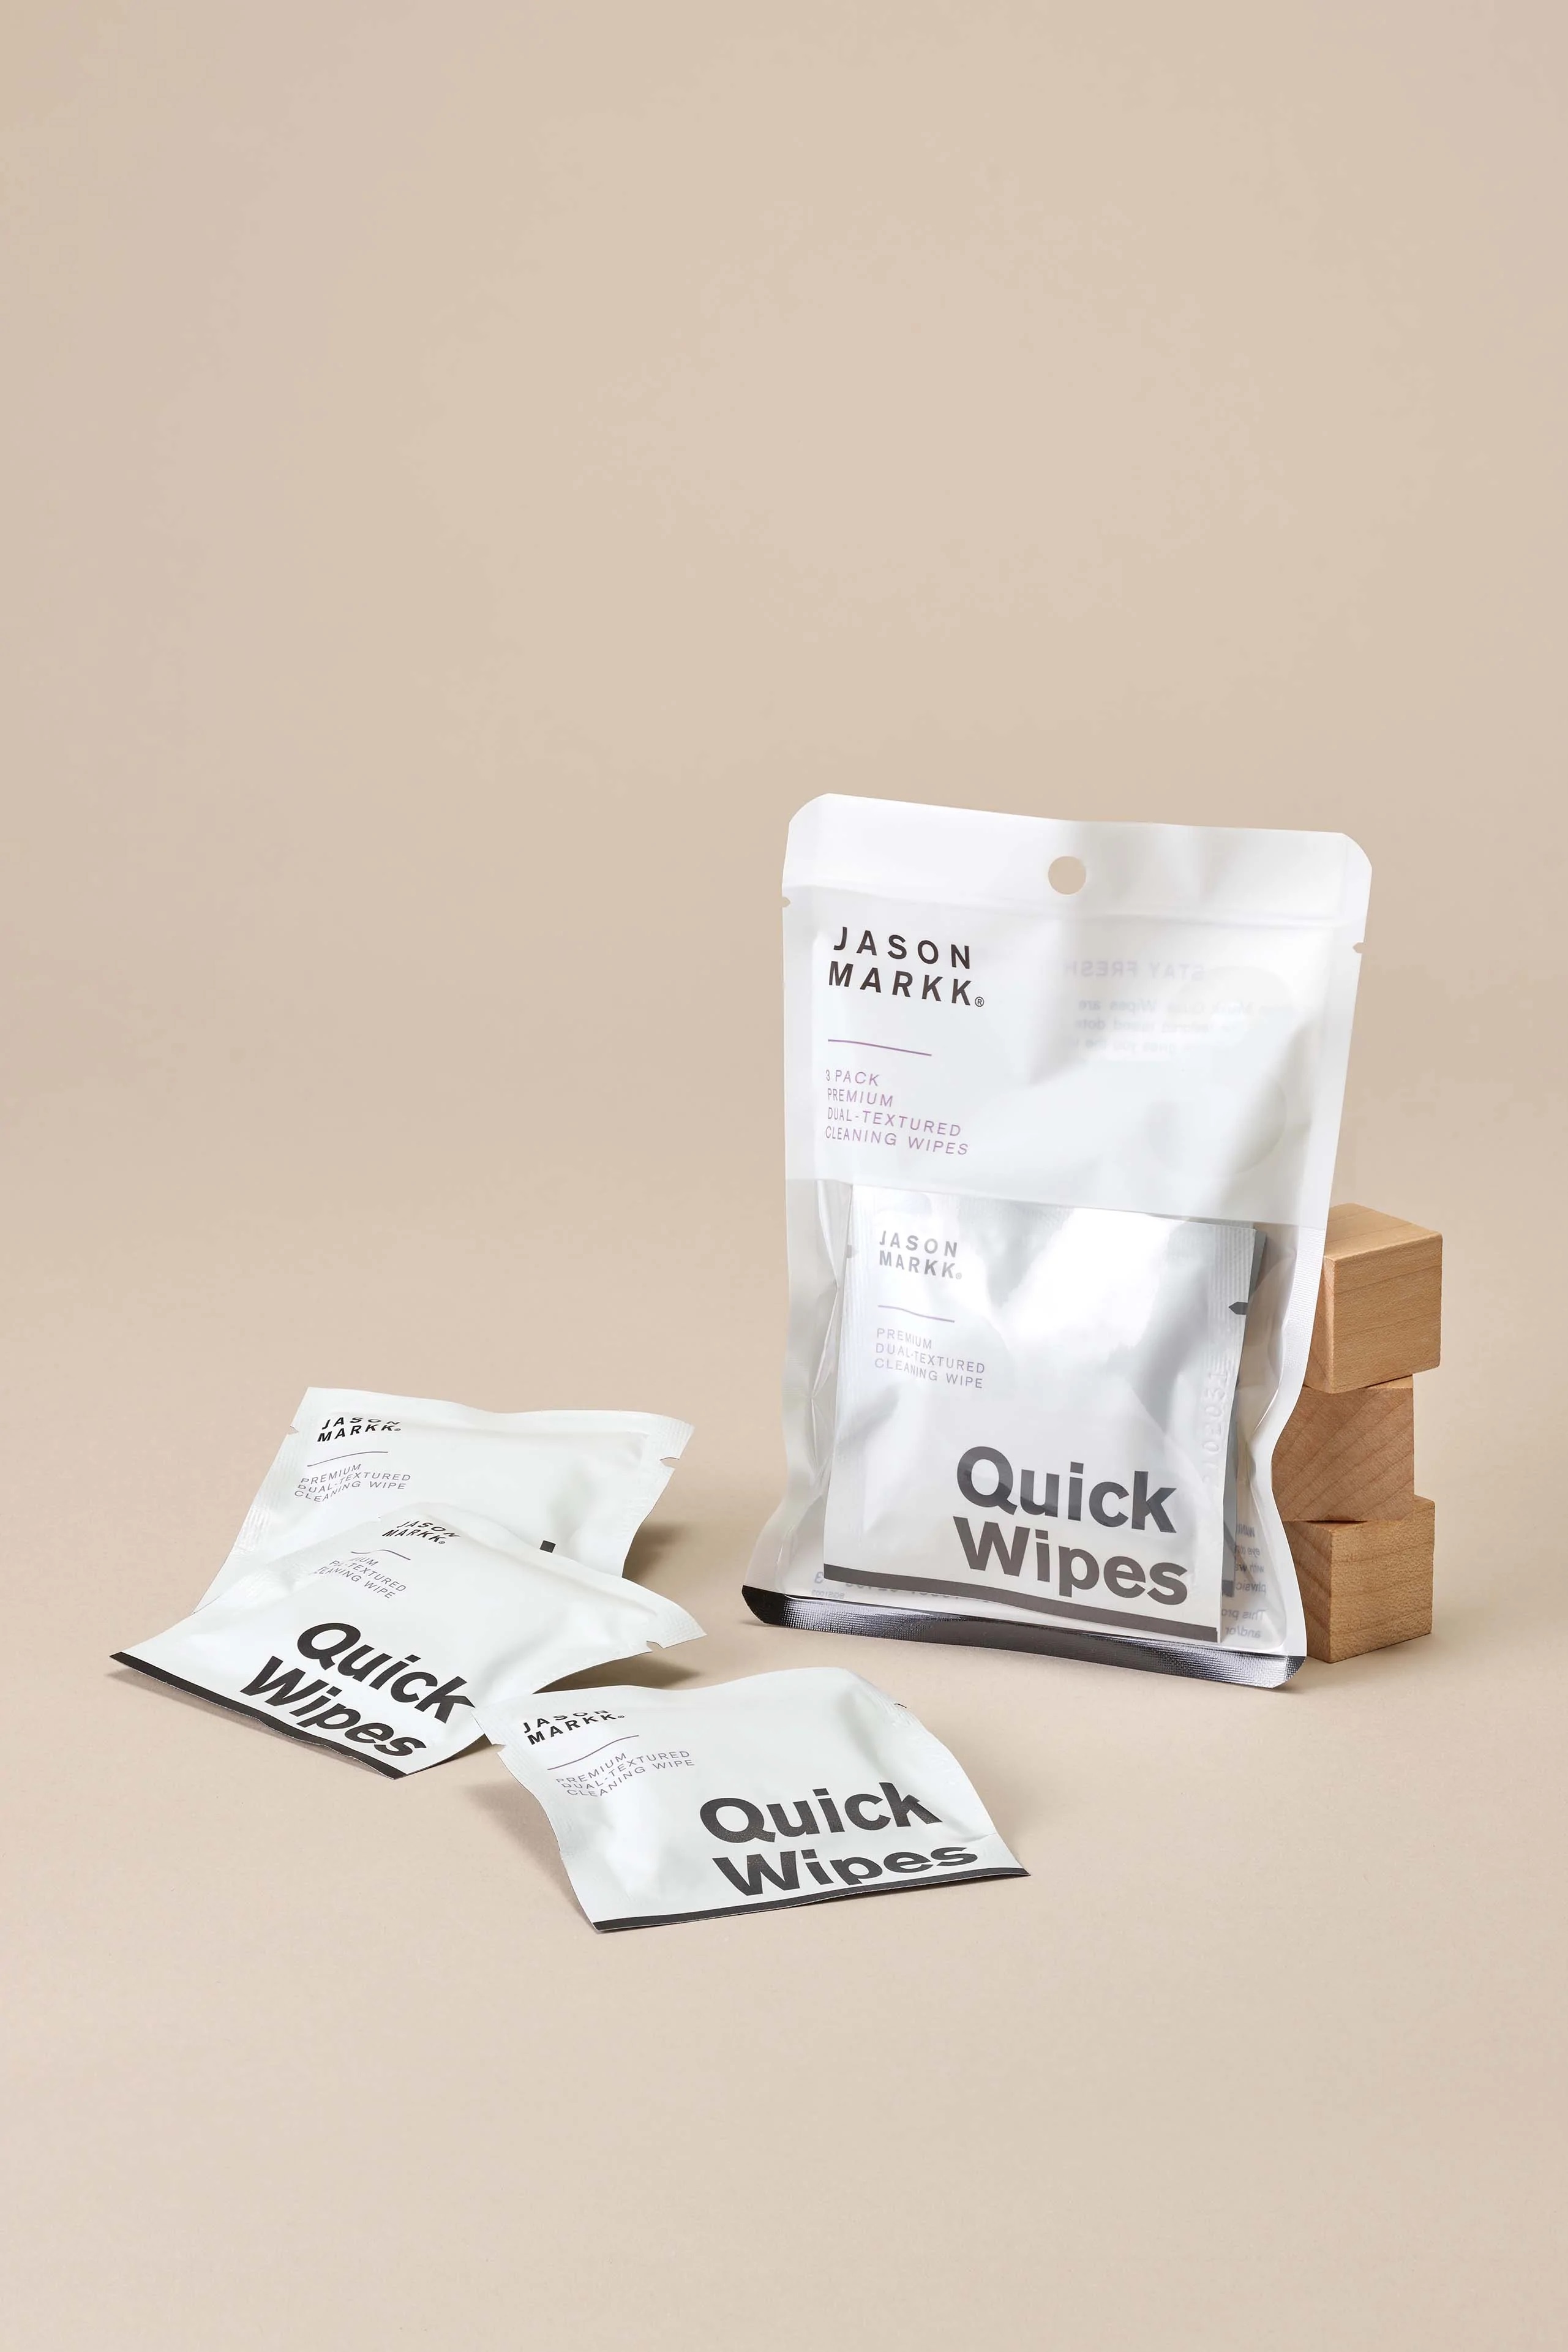 Jason Markk Quick Wipes In N/a